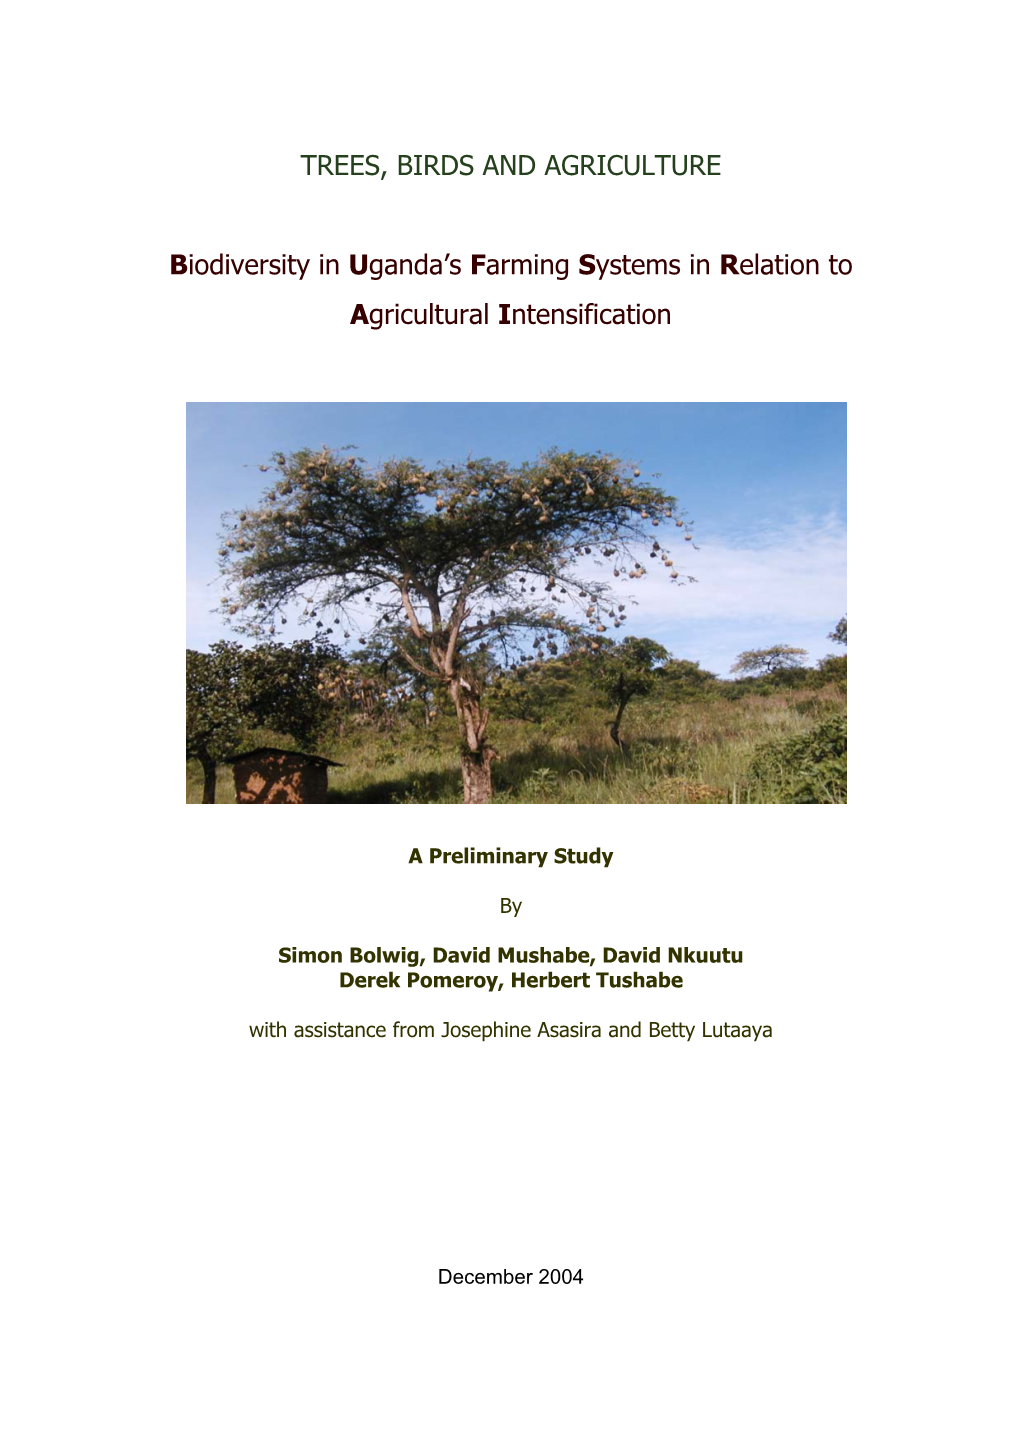 TREES, BIRDS and AGRICULTURE Biodiversity in Uganda's Farming